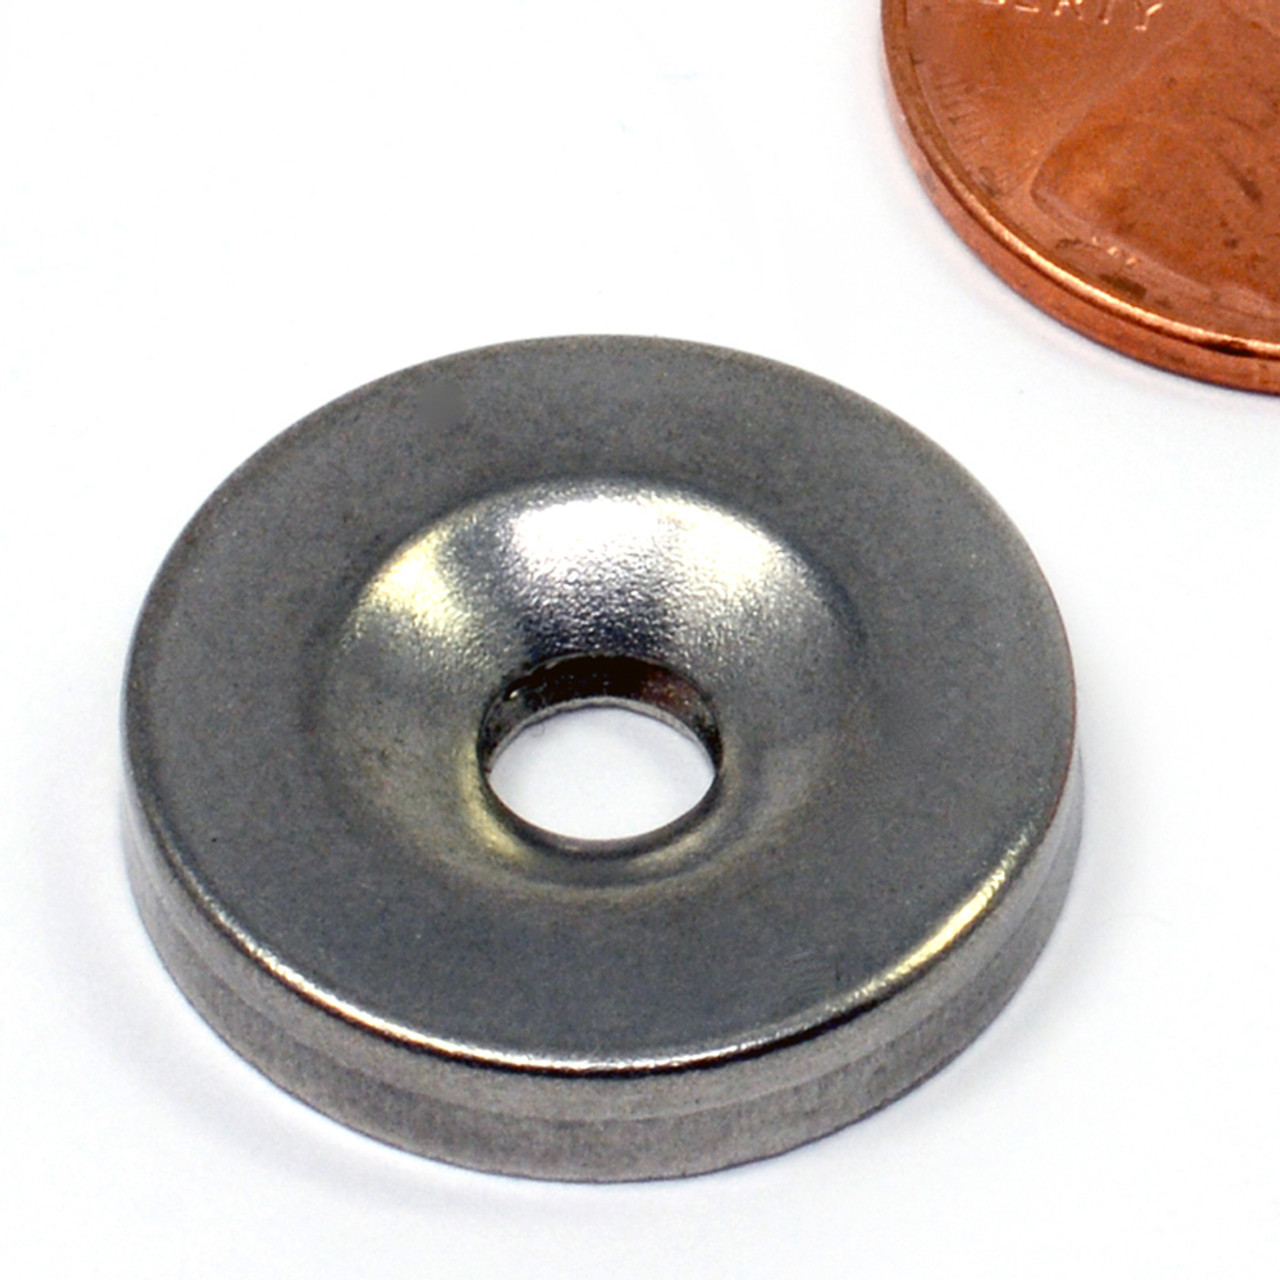 N52 Neodymium Disc Magnet Stainless Steel Covered | 9.8 LB 3/4x1/8